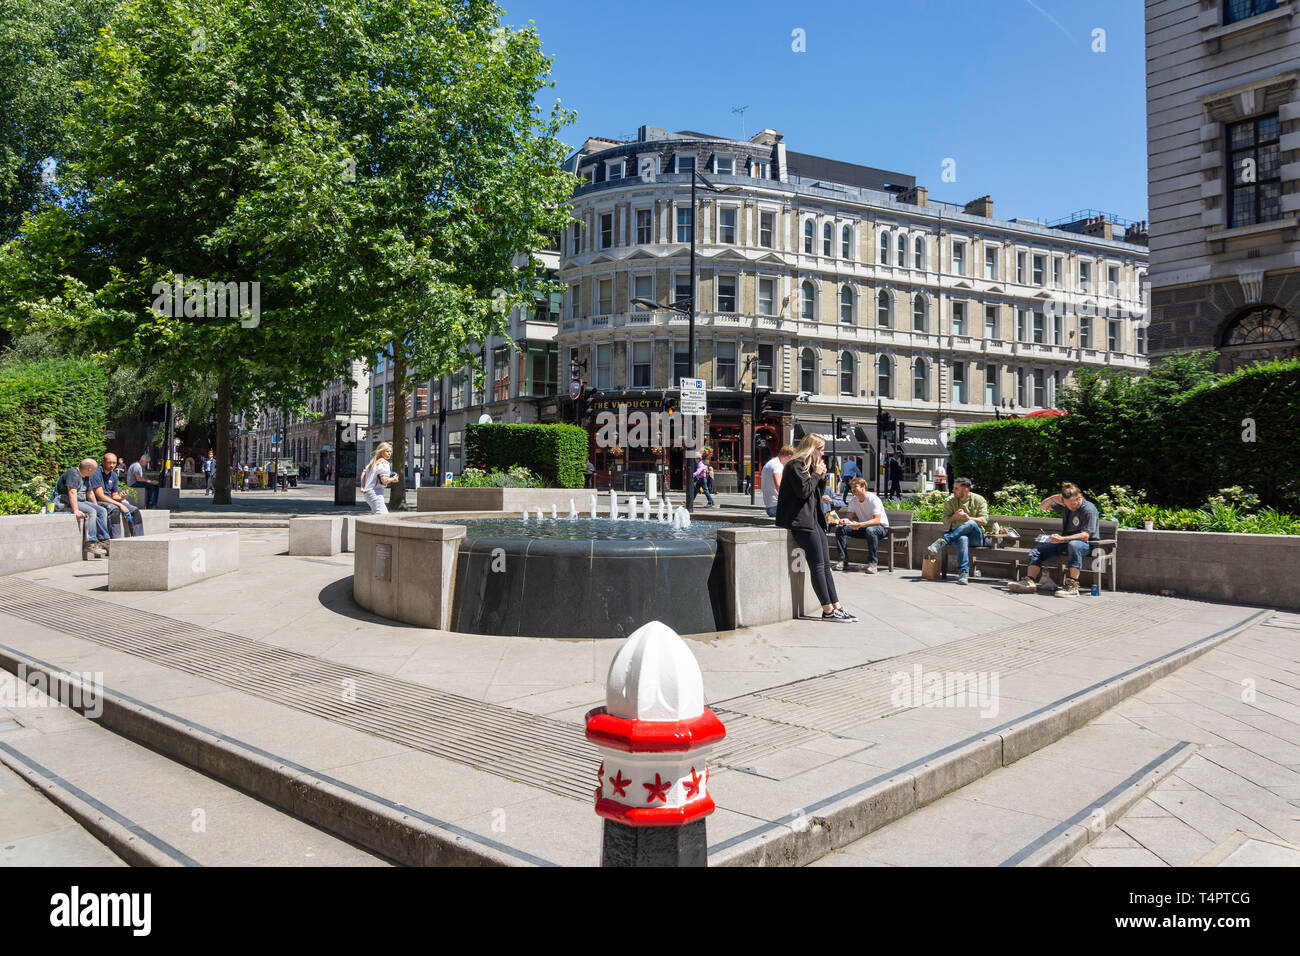 Fontaine de la rue, Old Bailey, Ludgate Hill, City of London, Greater London, Angleterre, Royaume-Uni Banque D'Images